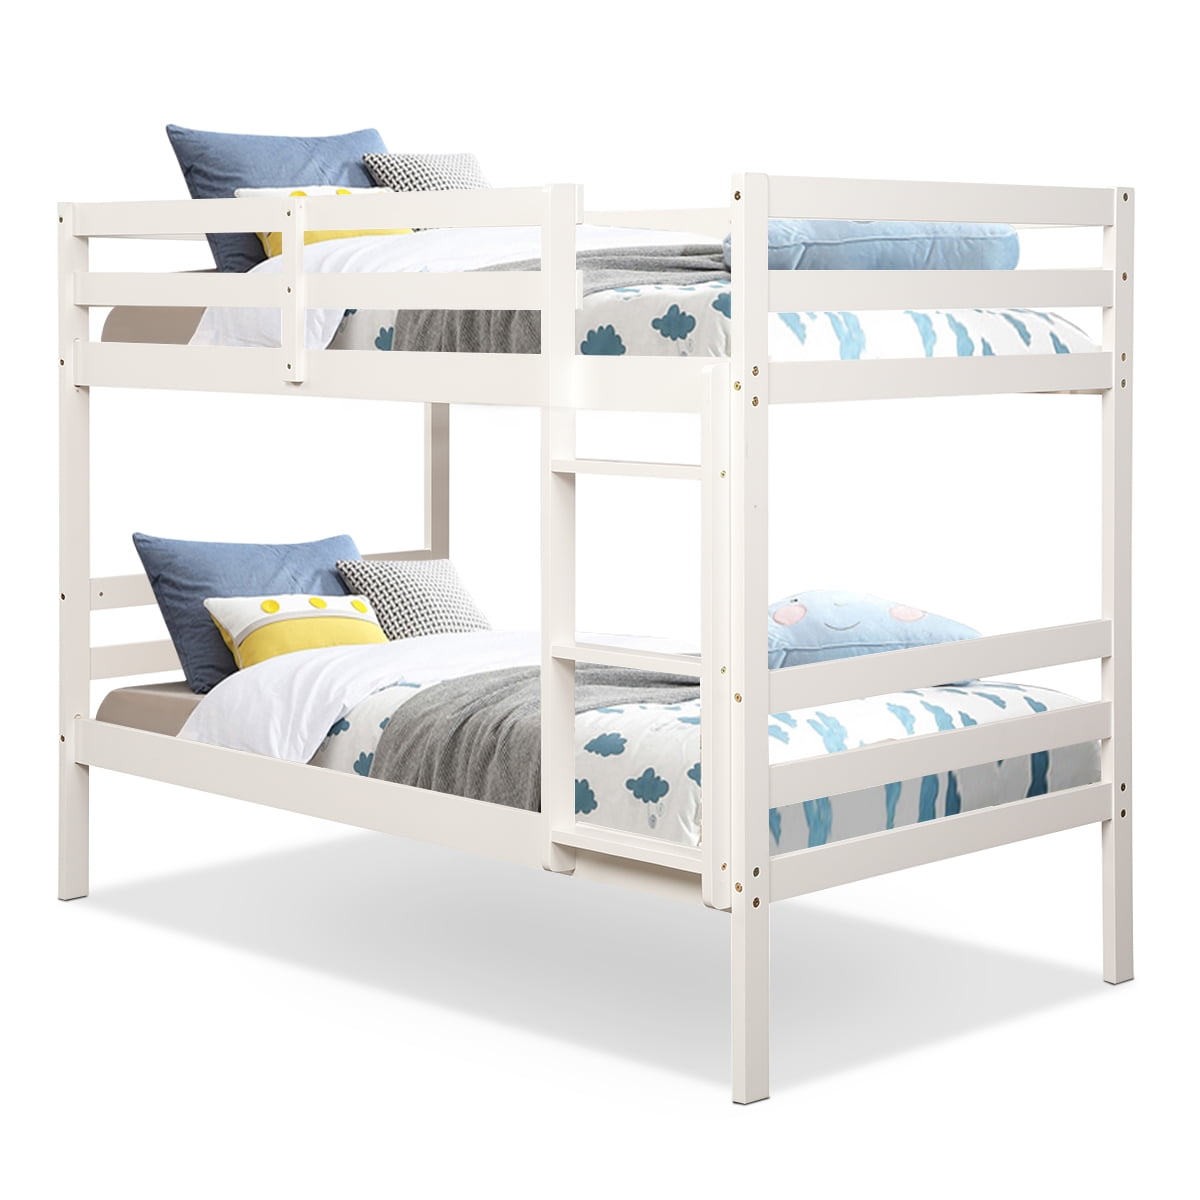 Costway Twin Over Wood Bunk Beds, White Bunk Bed Ladder